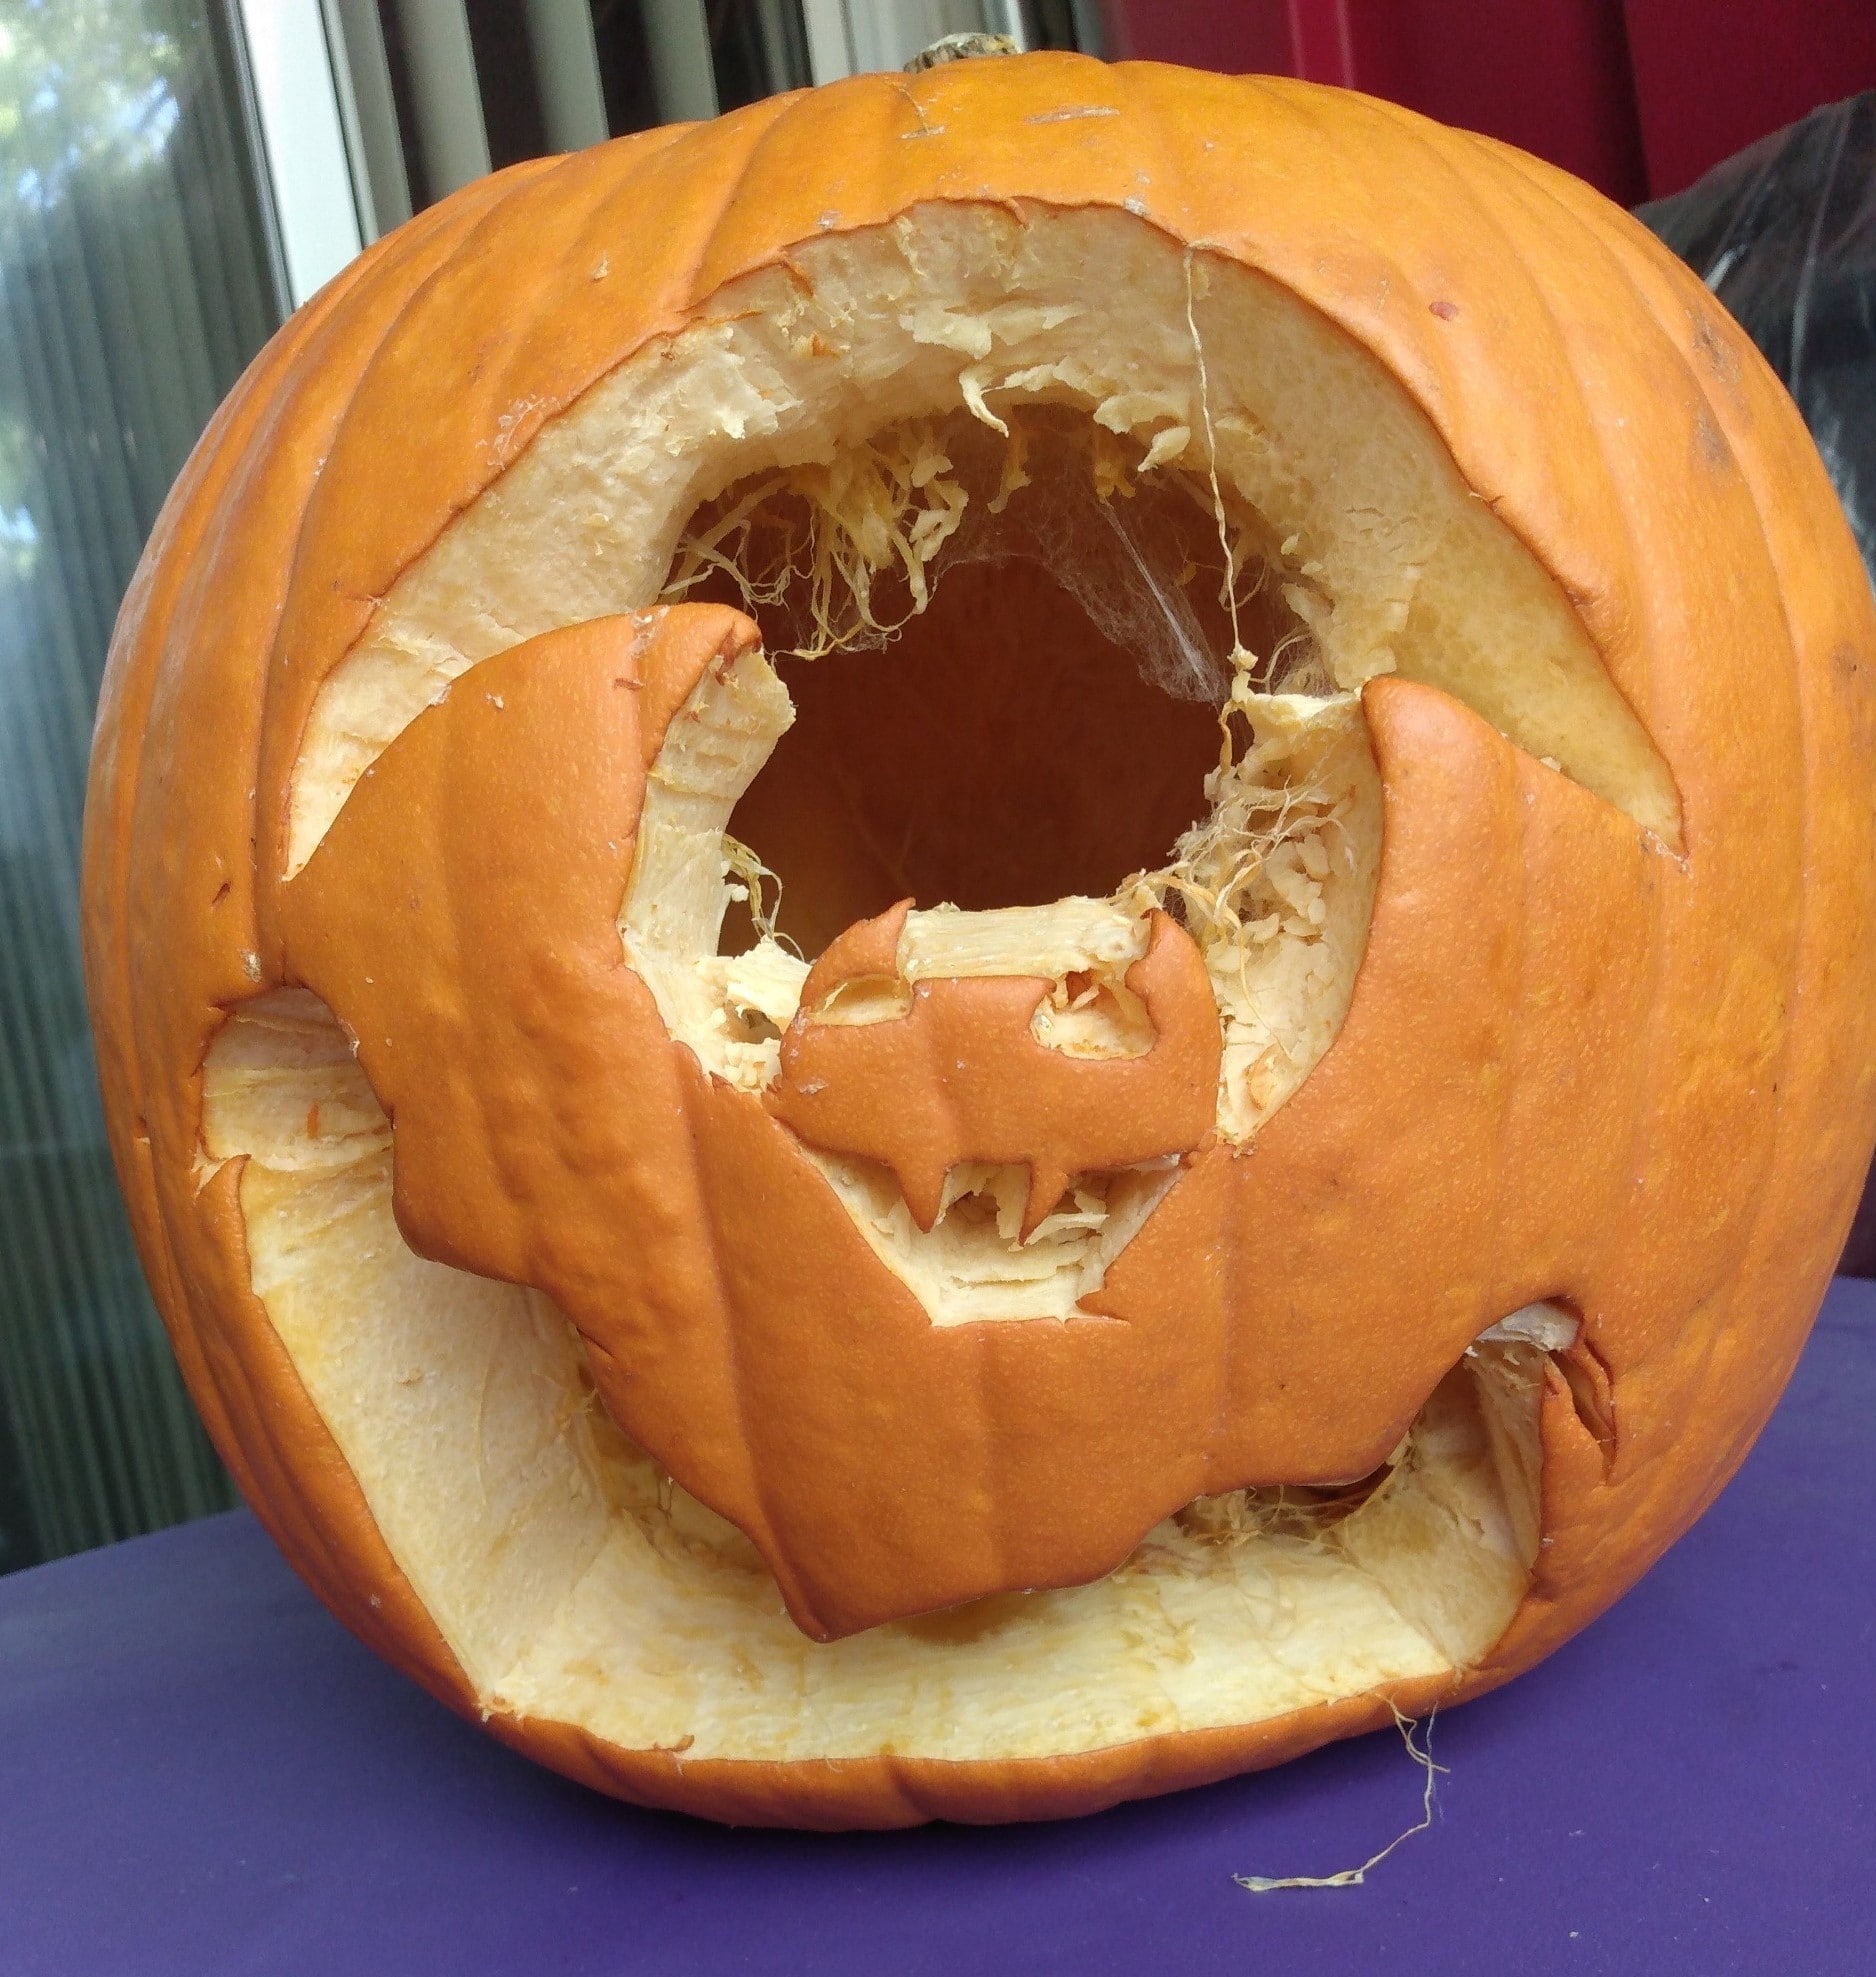 Mentors & mentees were able to show off the pumpkin carvings they made